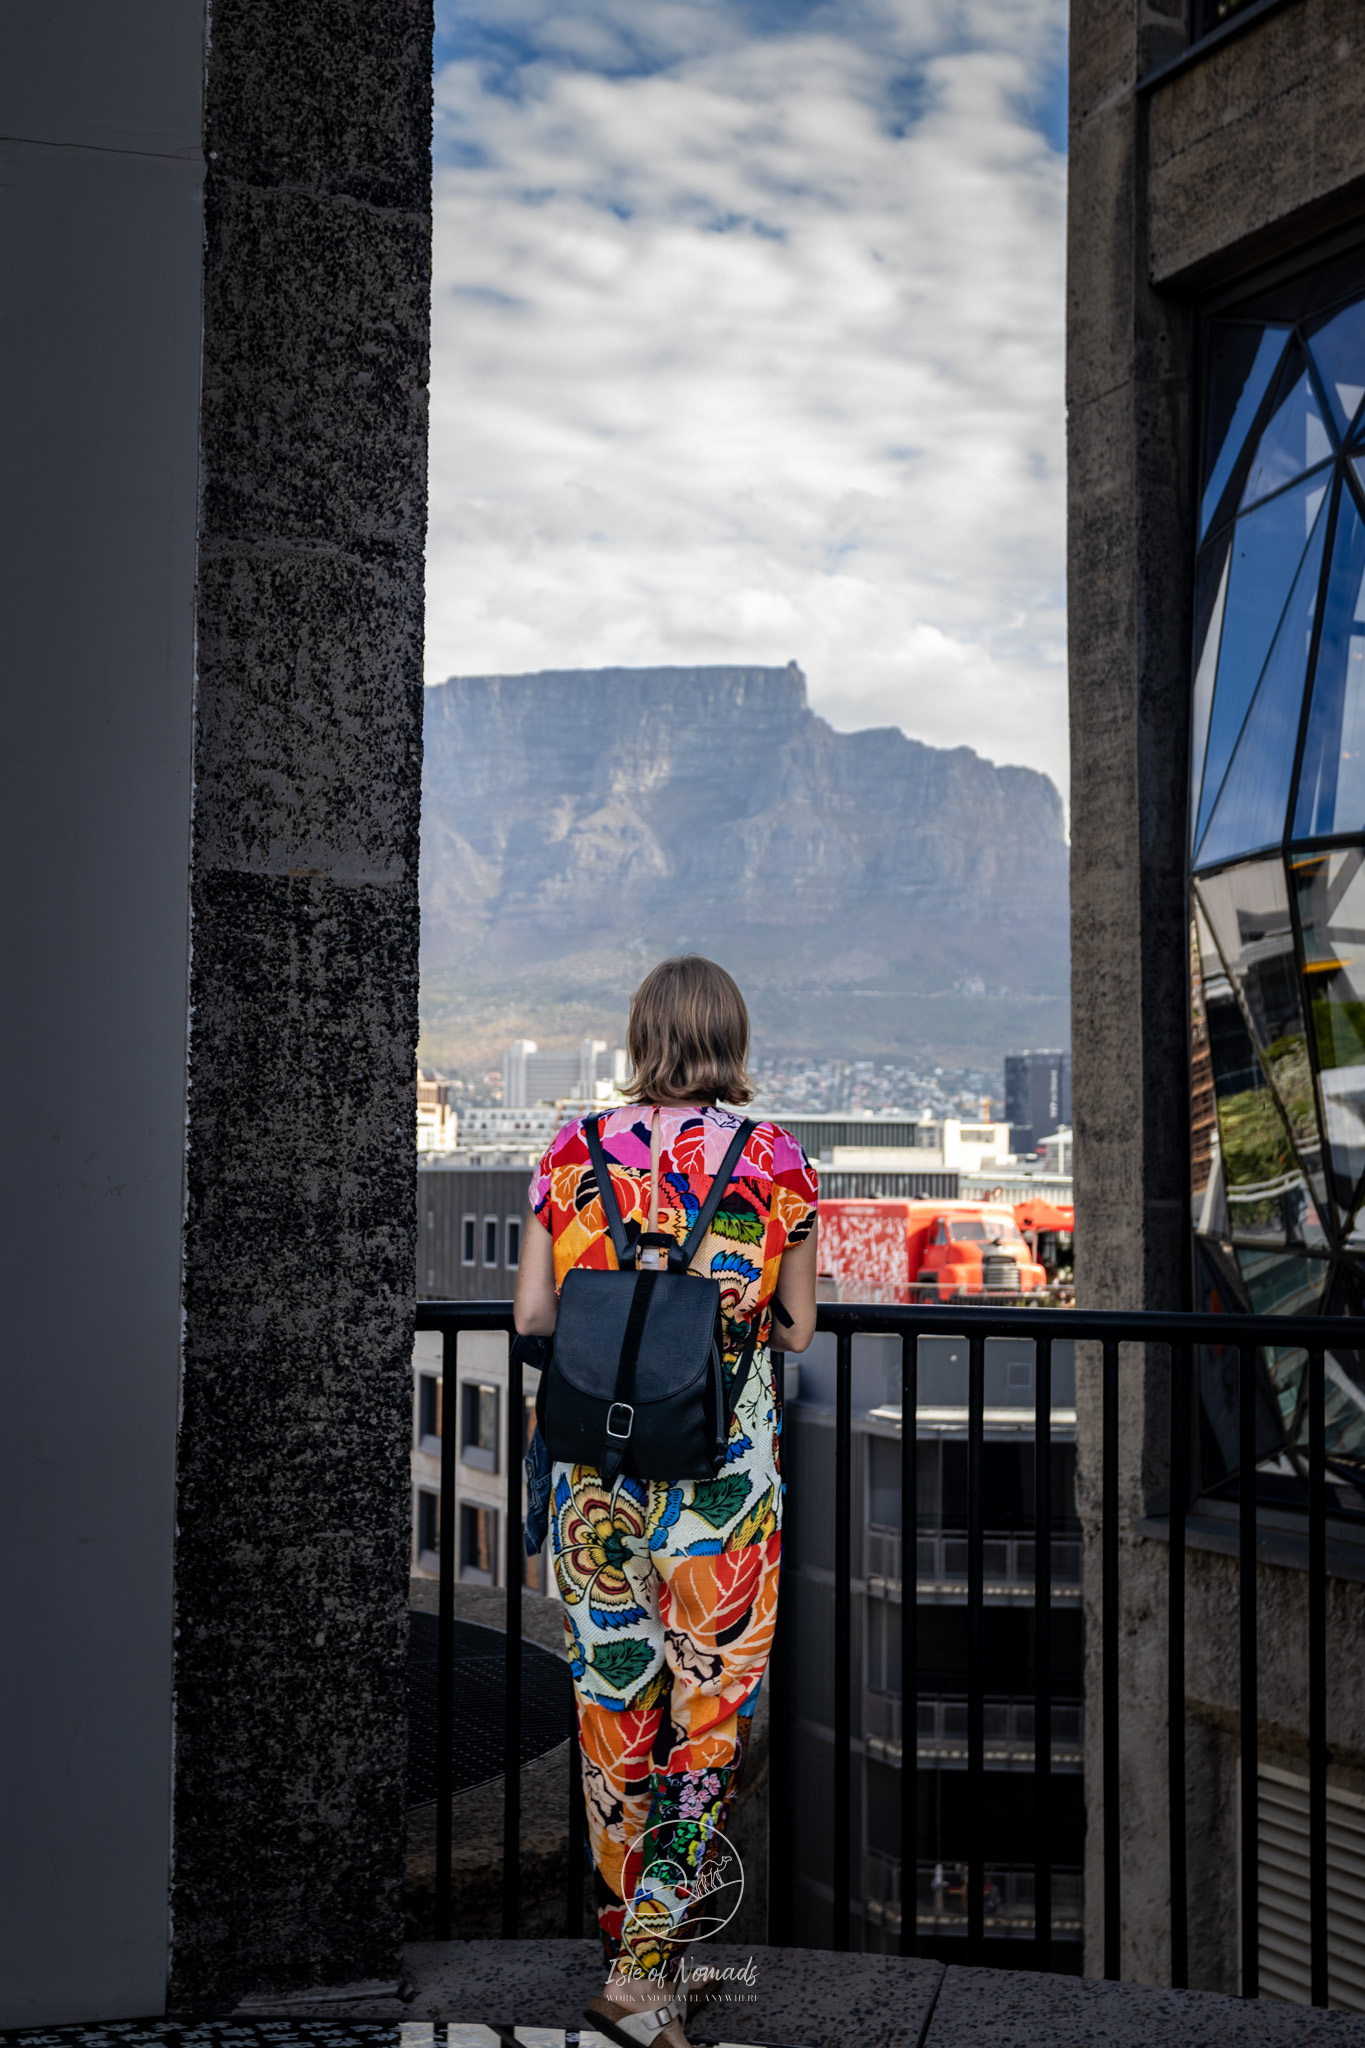 ...and wandering around the V&A Waterfront gives you beautiful views of the Table Mountain and the City